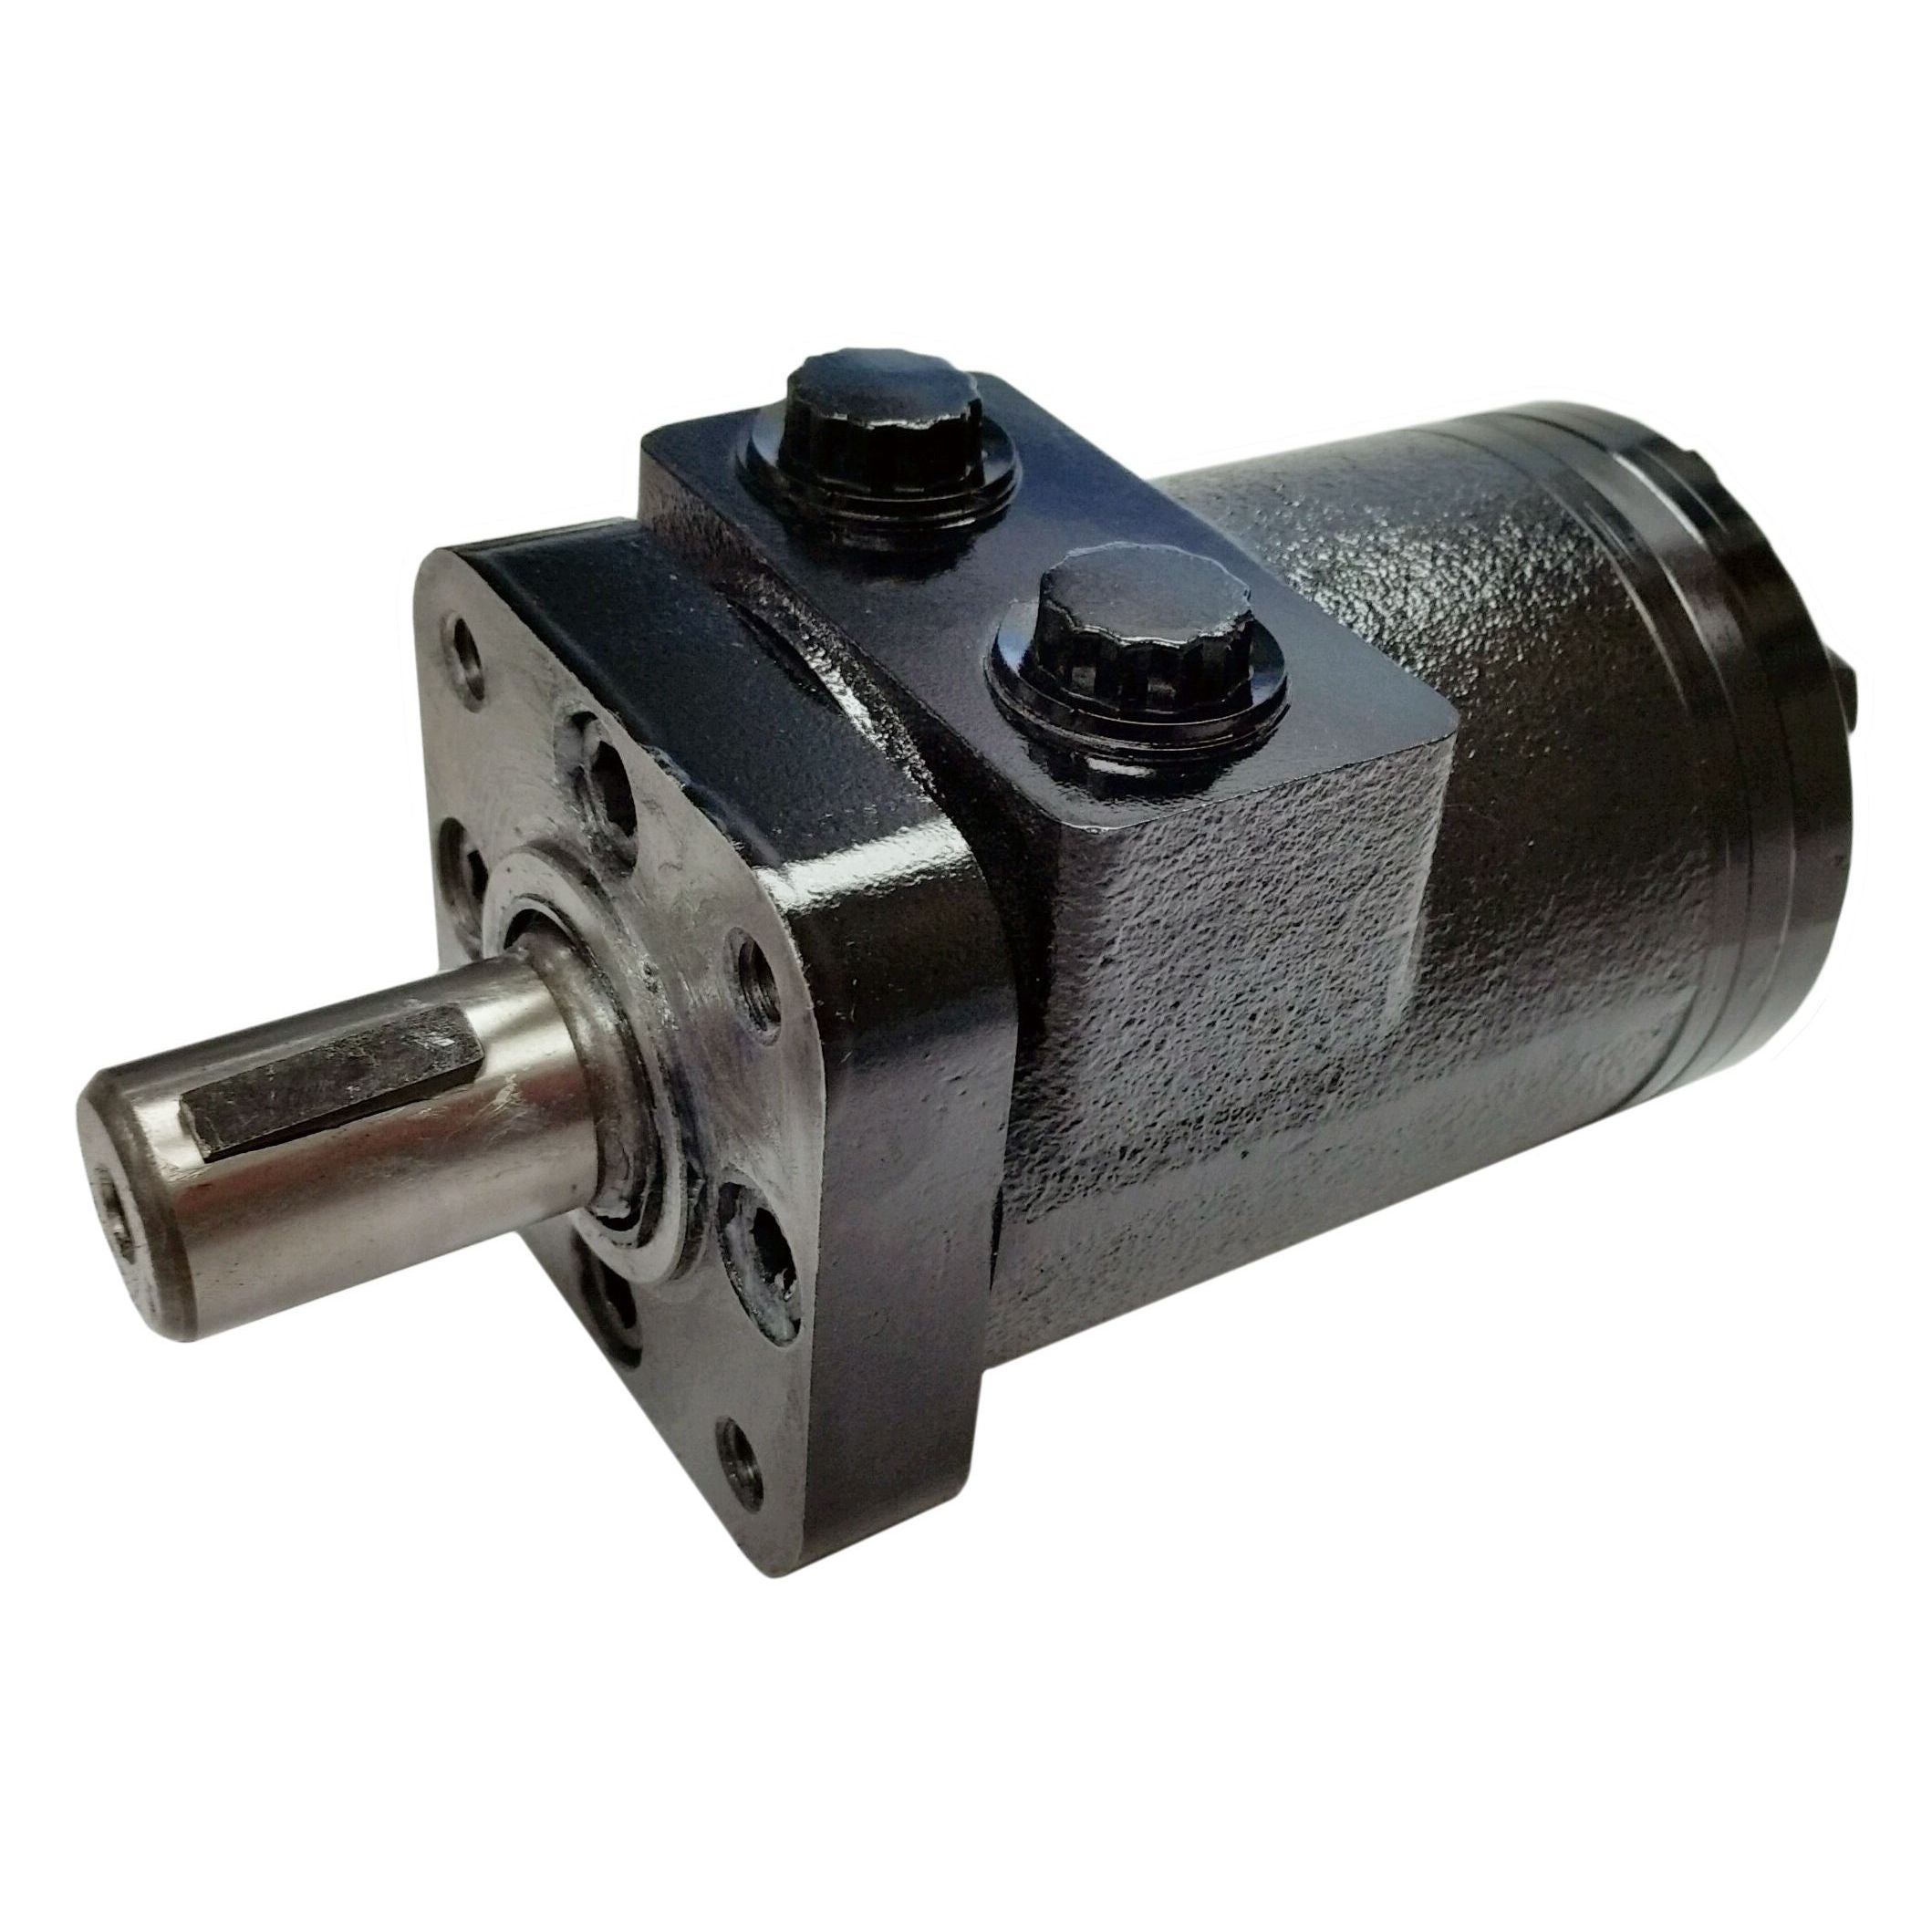 BMPH-80-H4-S-P : Dynamic LSHT Motor, 77.7cc, 770RPM, 1292in-lb, 2031psi Differential, 15.85GPM, SAE A 4-Bolt Mount, 6-Tooth Shaft, Side Ported, 1/2" NPT